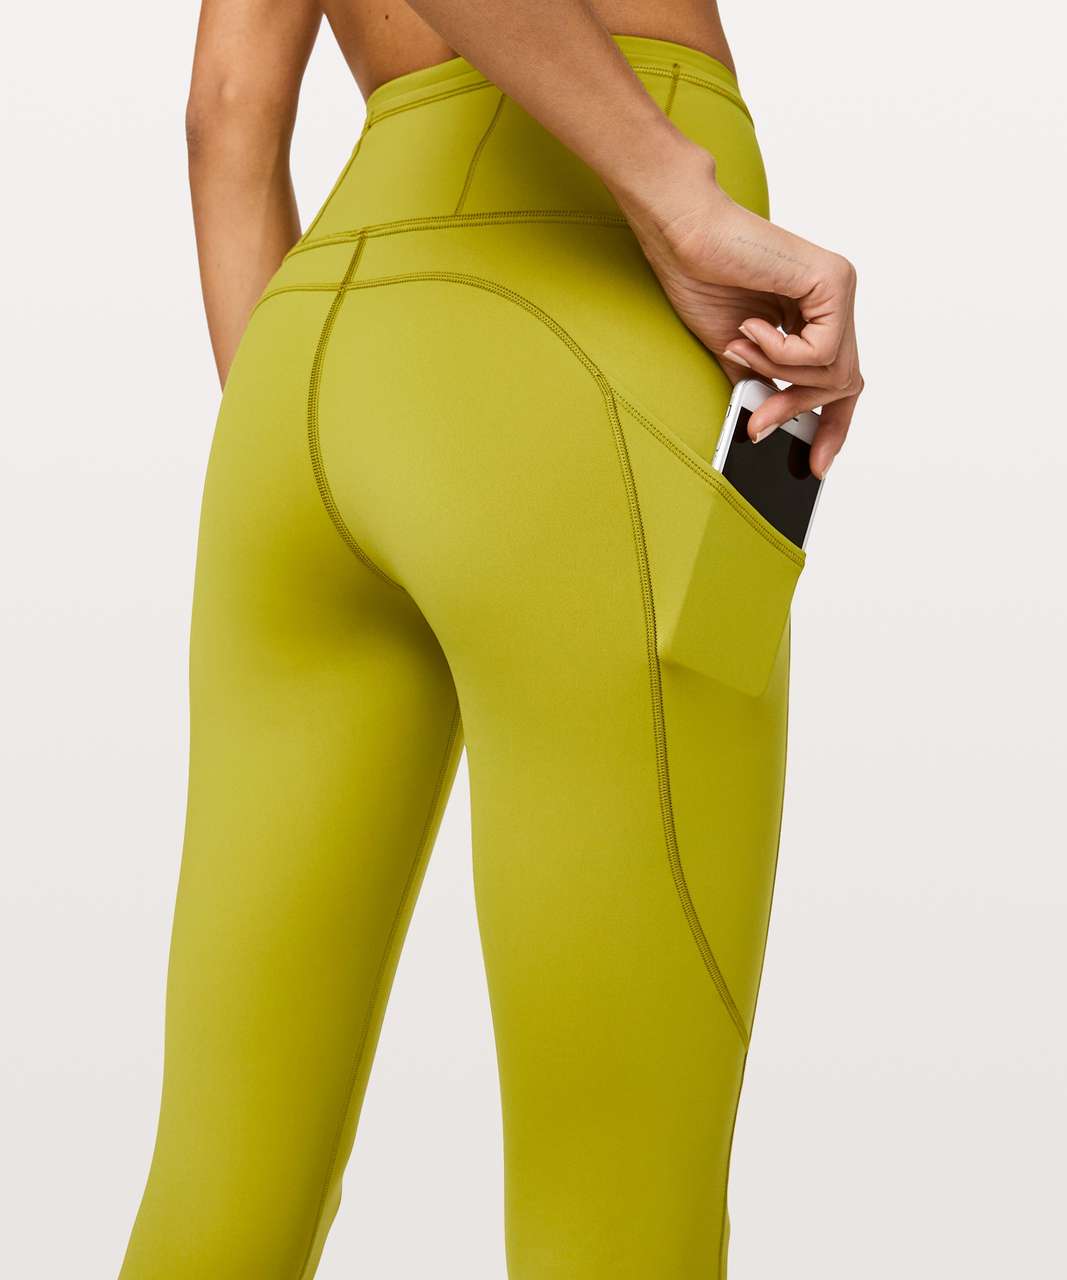 Lululemon Fast and Free Crop II 19" *Nulux - Golden Lime